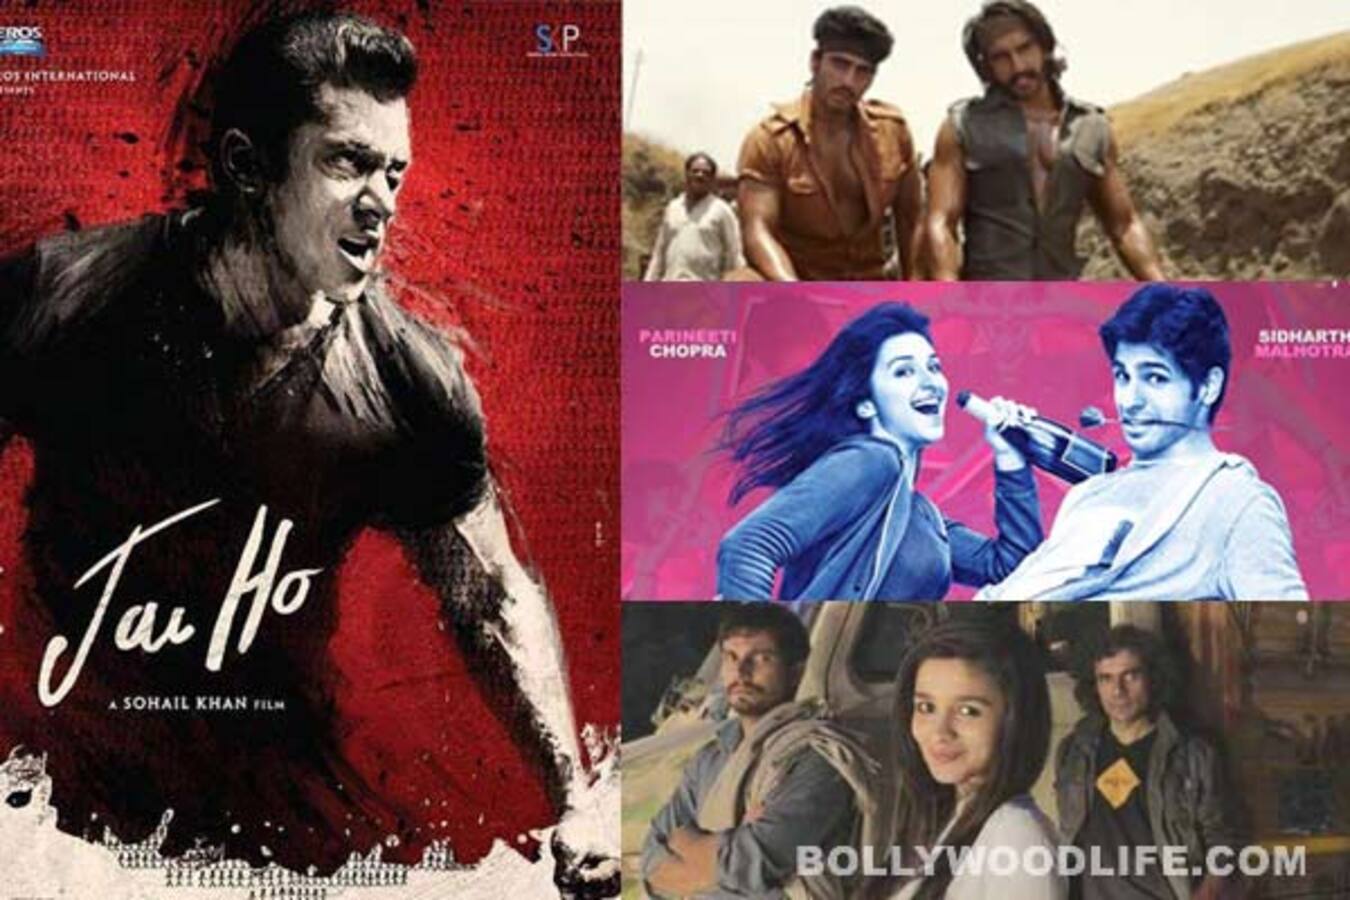 Jai Ho, Gunday, Hasee Toh Phasee, Highway, Main Tera Hero and P.K. among the most awaited films  of 2014